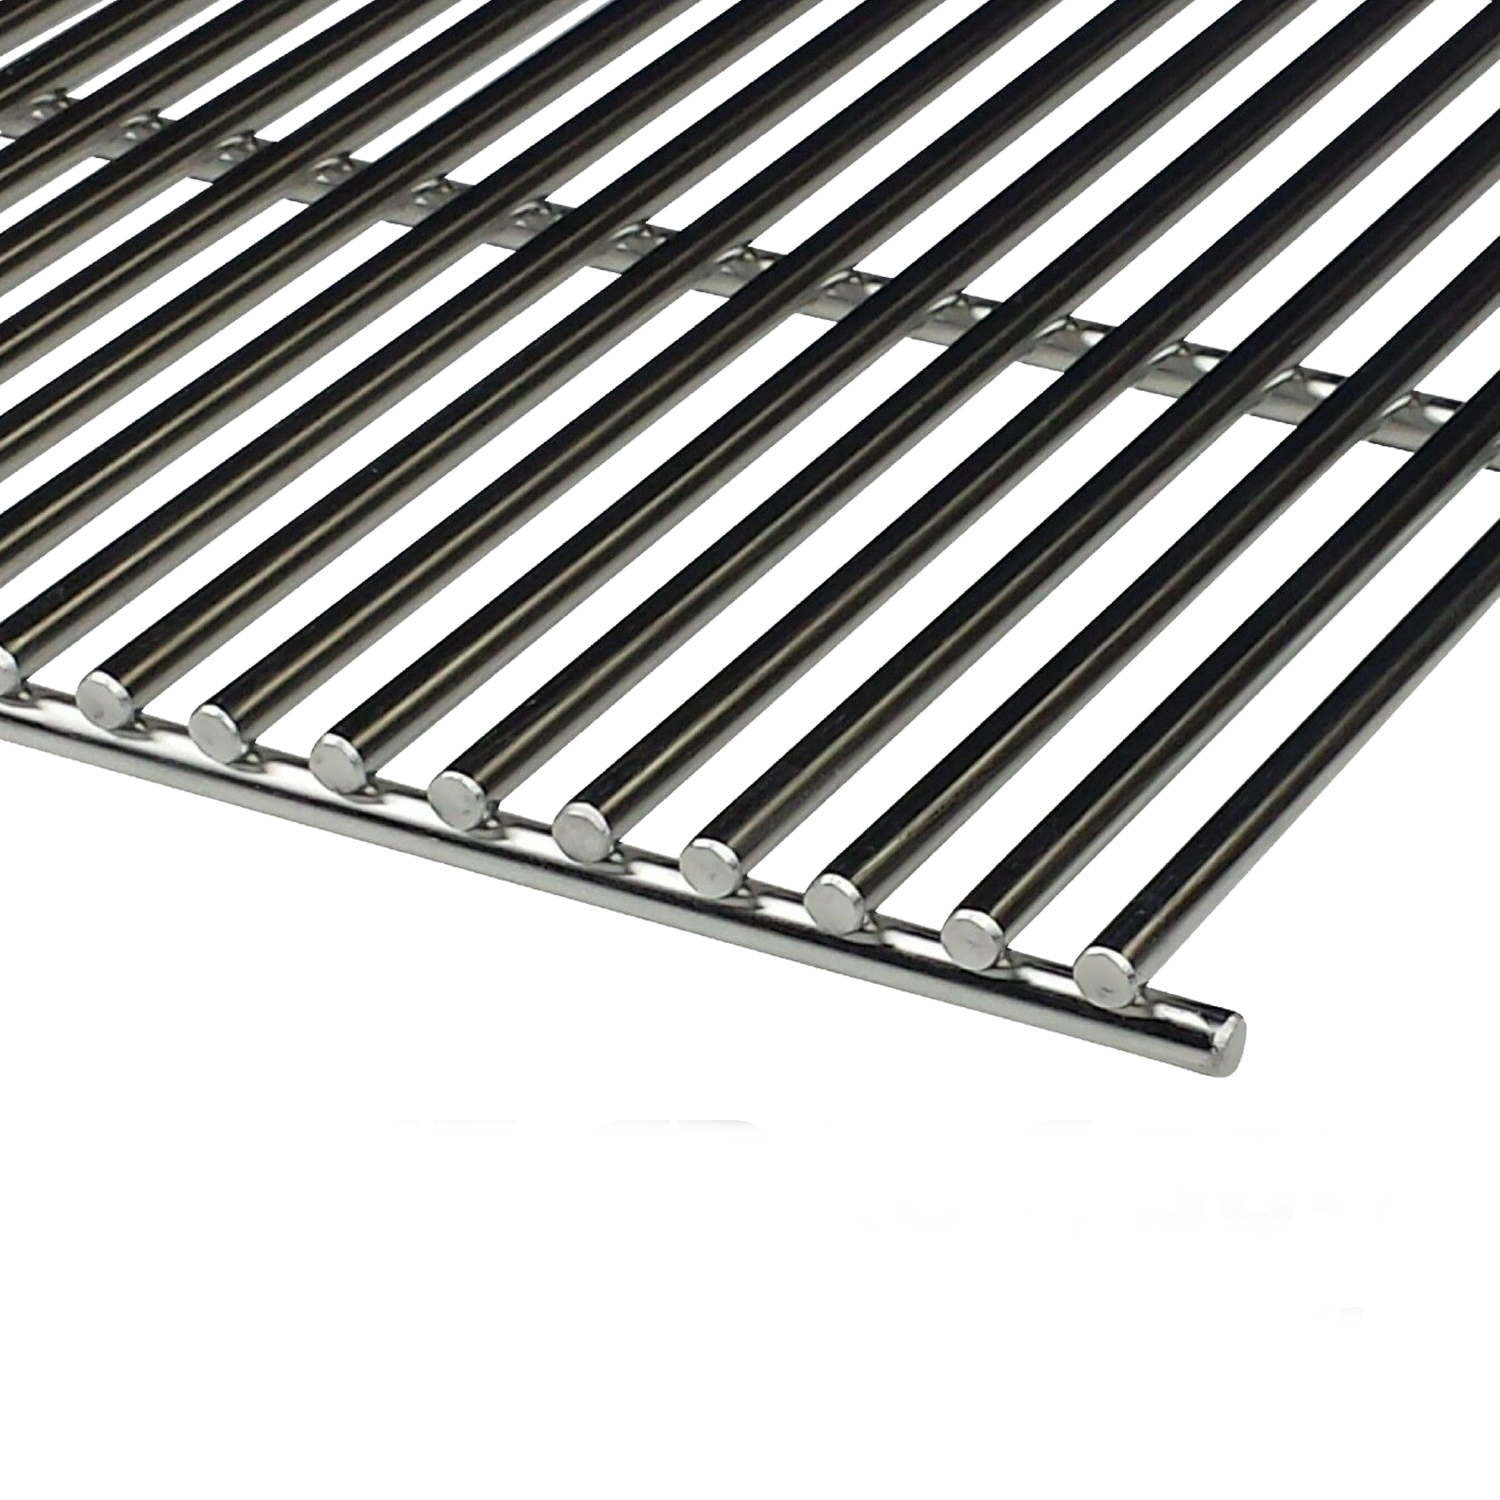 KASA Stainless Steel Bbq Grill Grille Plate Solid 8mm Bars Barbecue 48 X 39 Cm